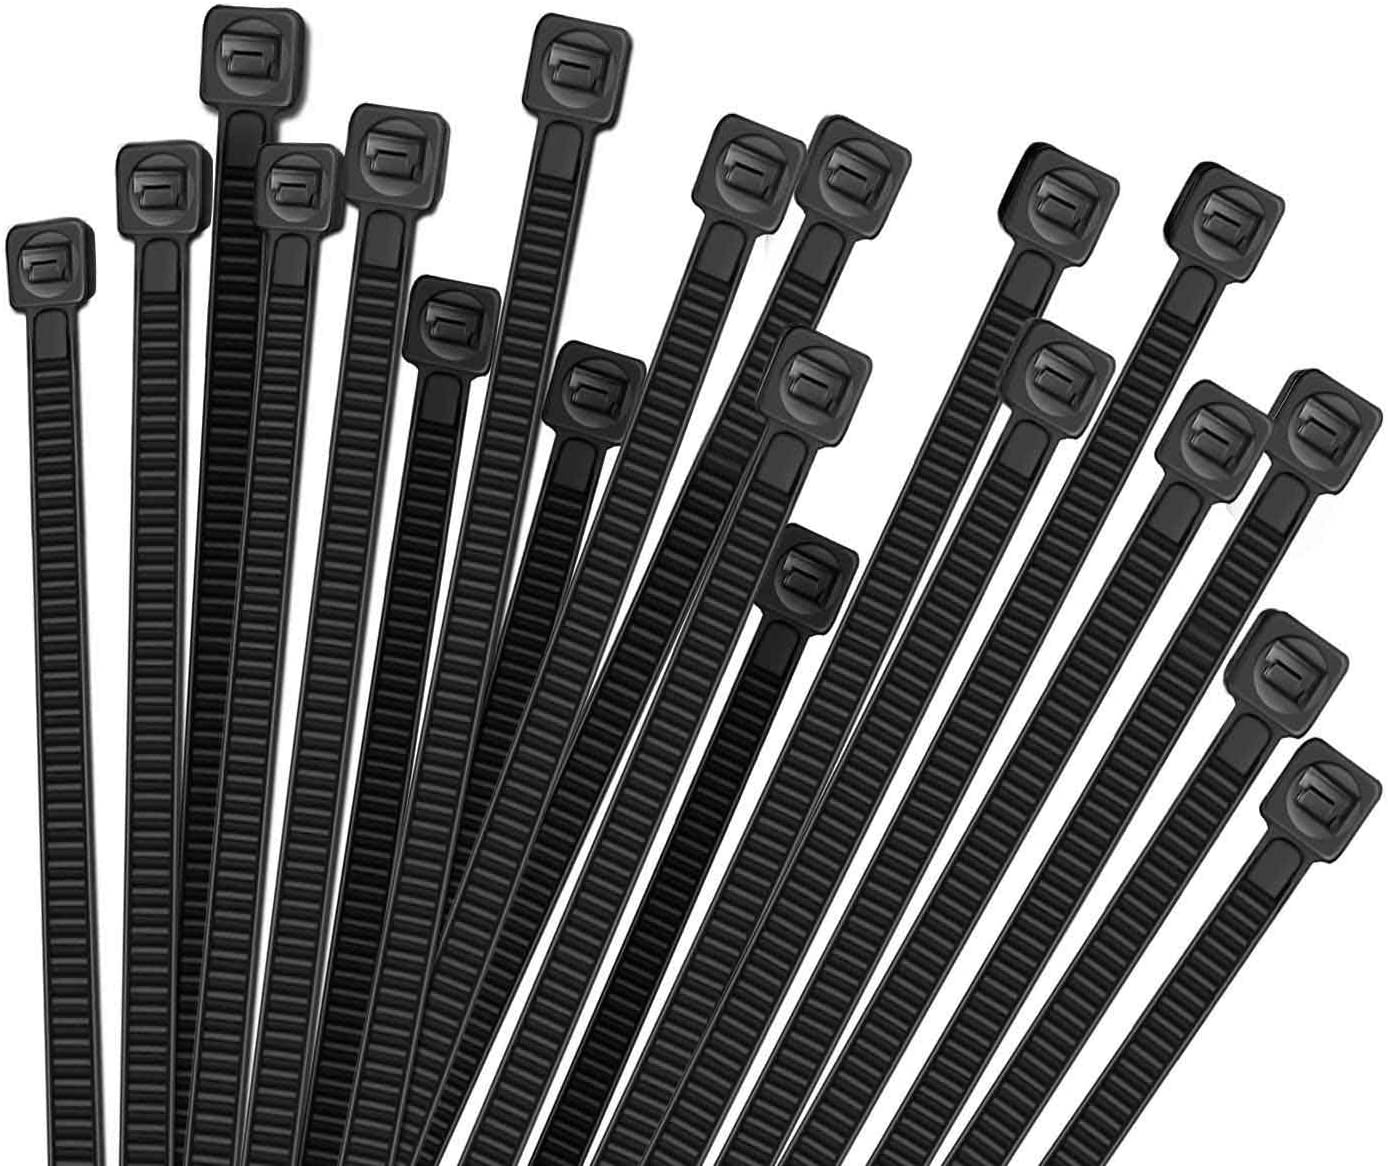 Kuber Industries Self Locking Cable Ties (250 mm x 3.6 mm - Pack of 100 Pcs) Black